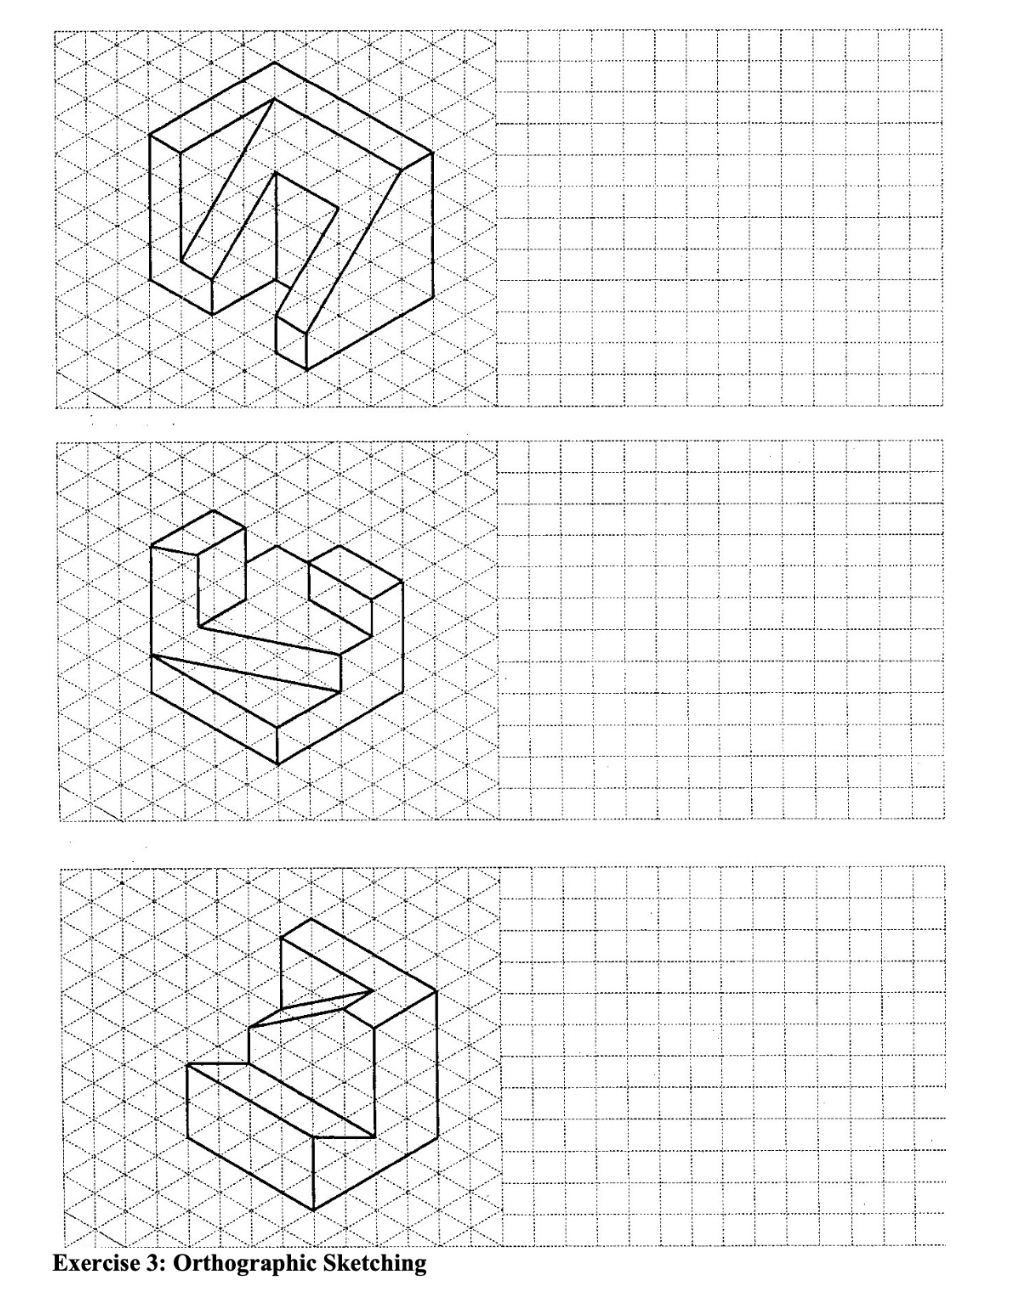 Solved Exercise 3: Orthographic Sketching | Chegg.com